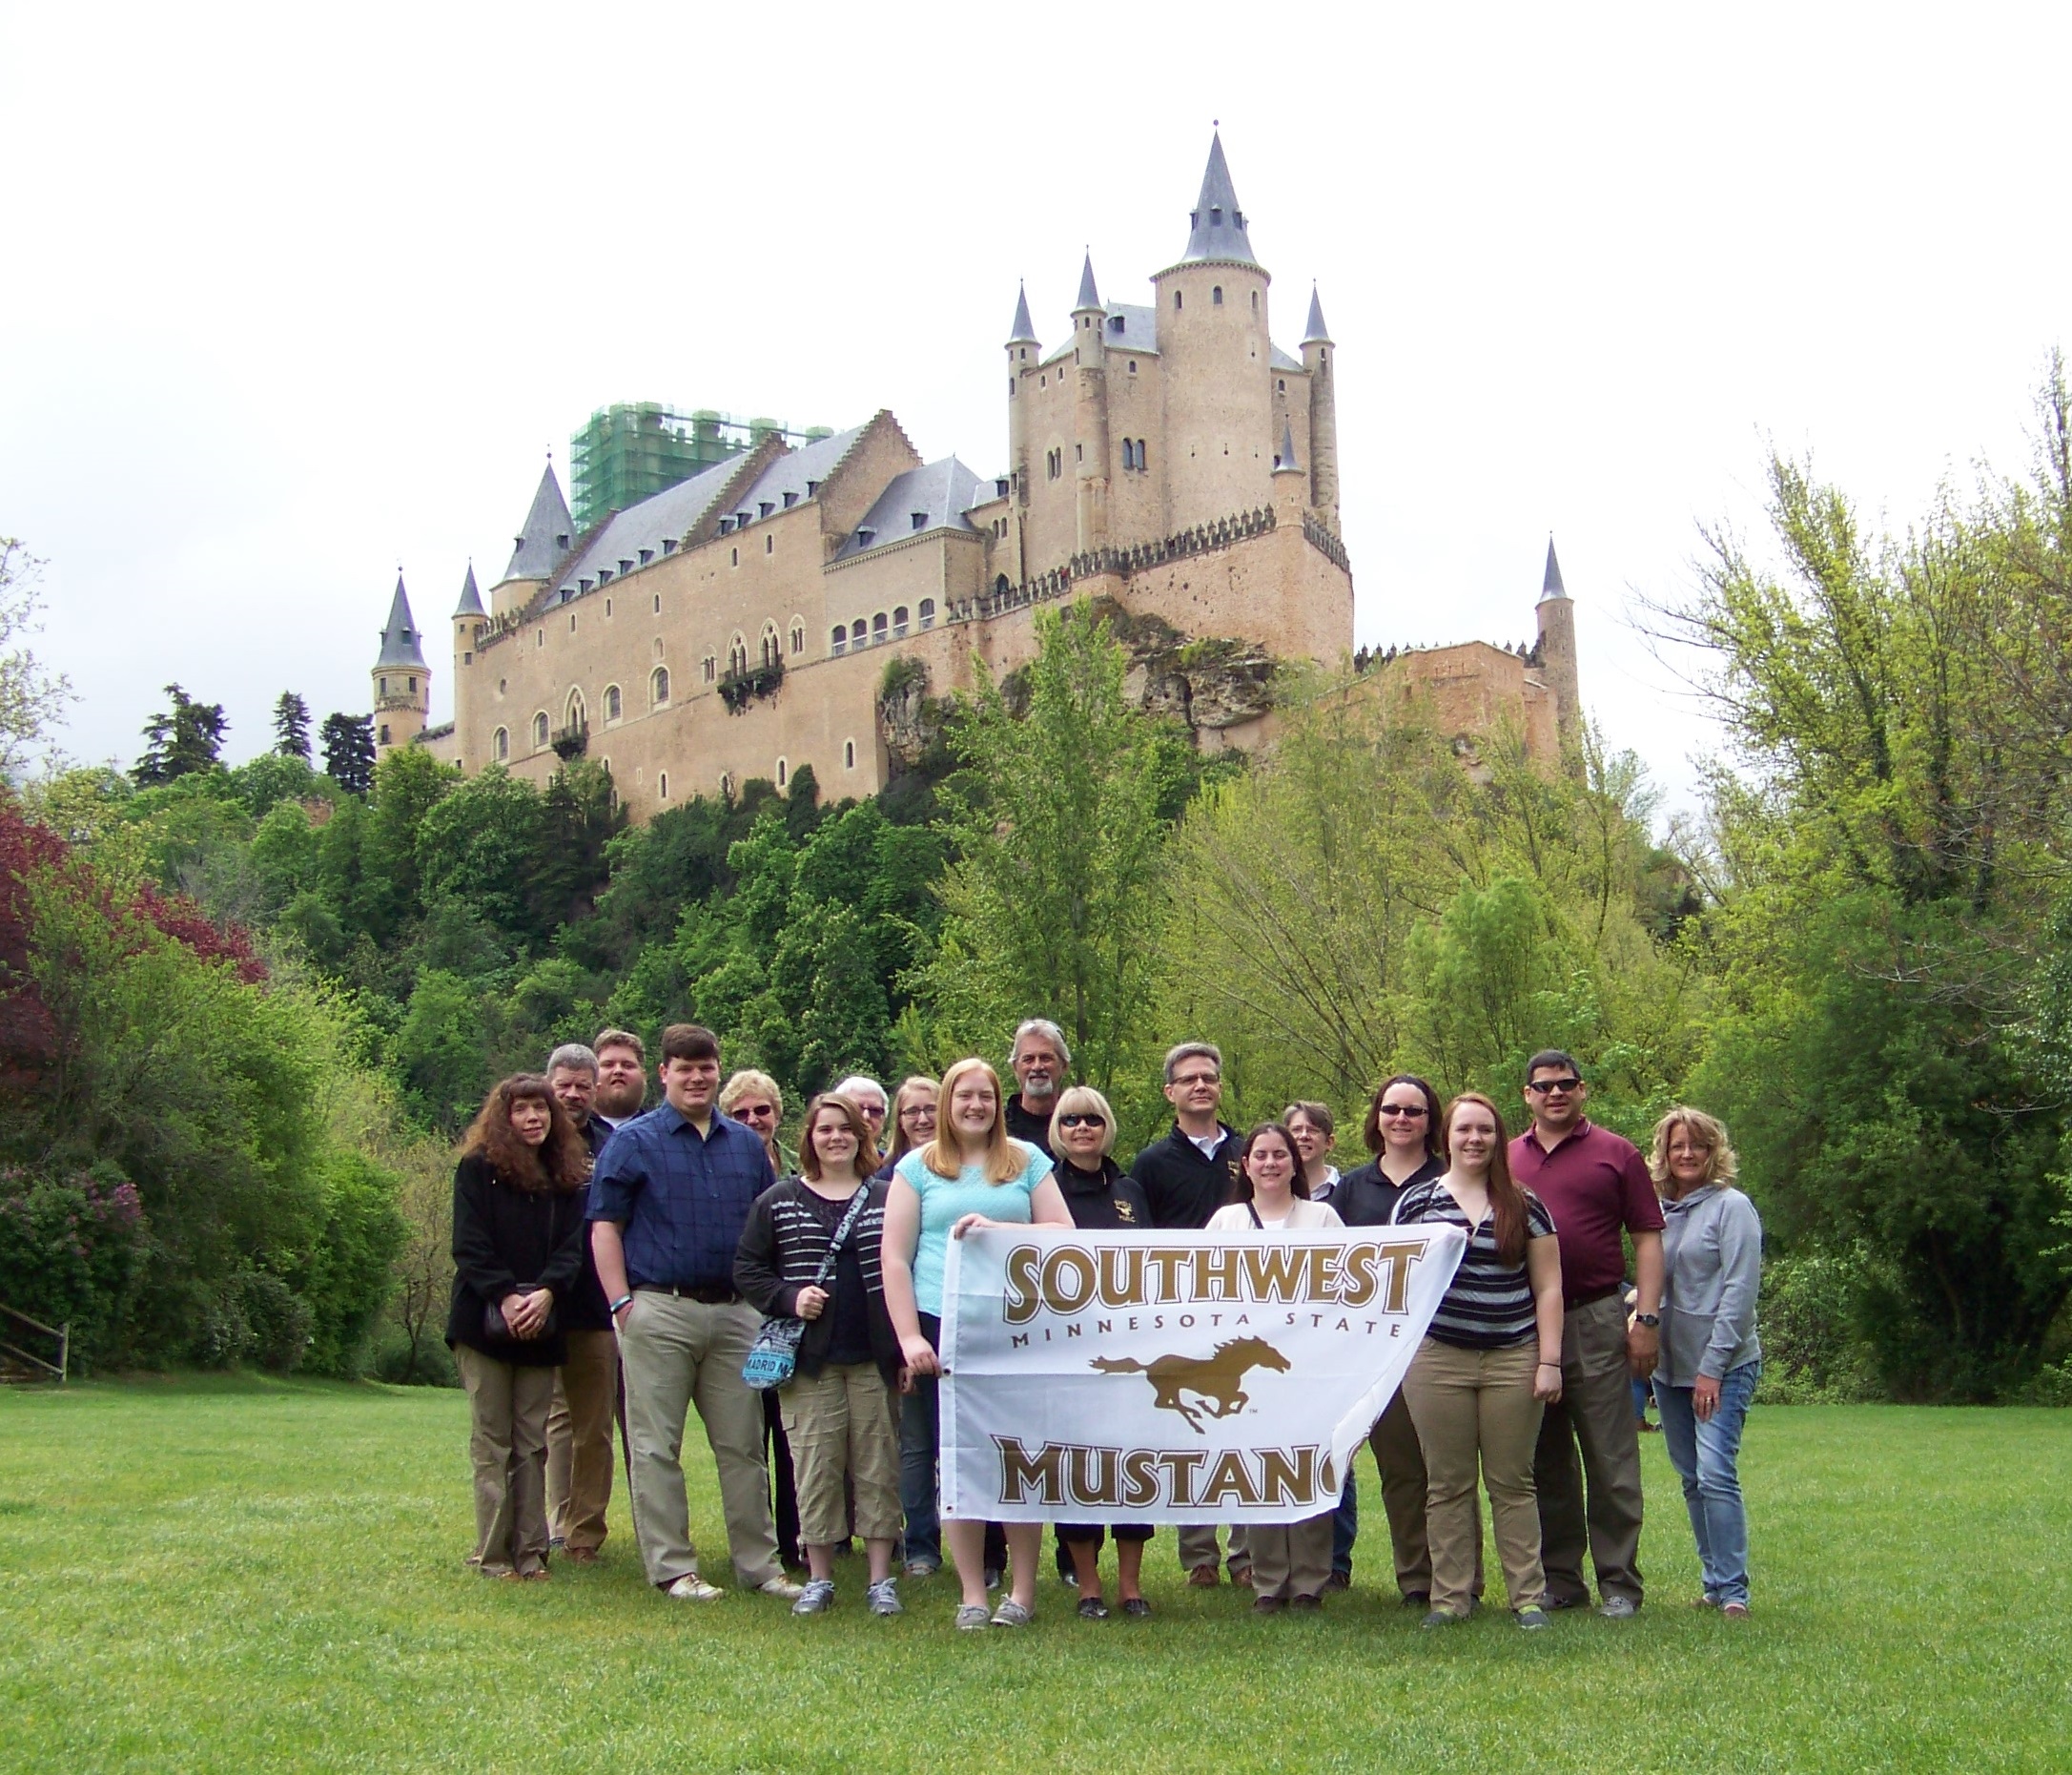 The tour participants in front of the Alcazar in Segovia